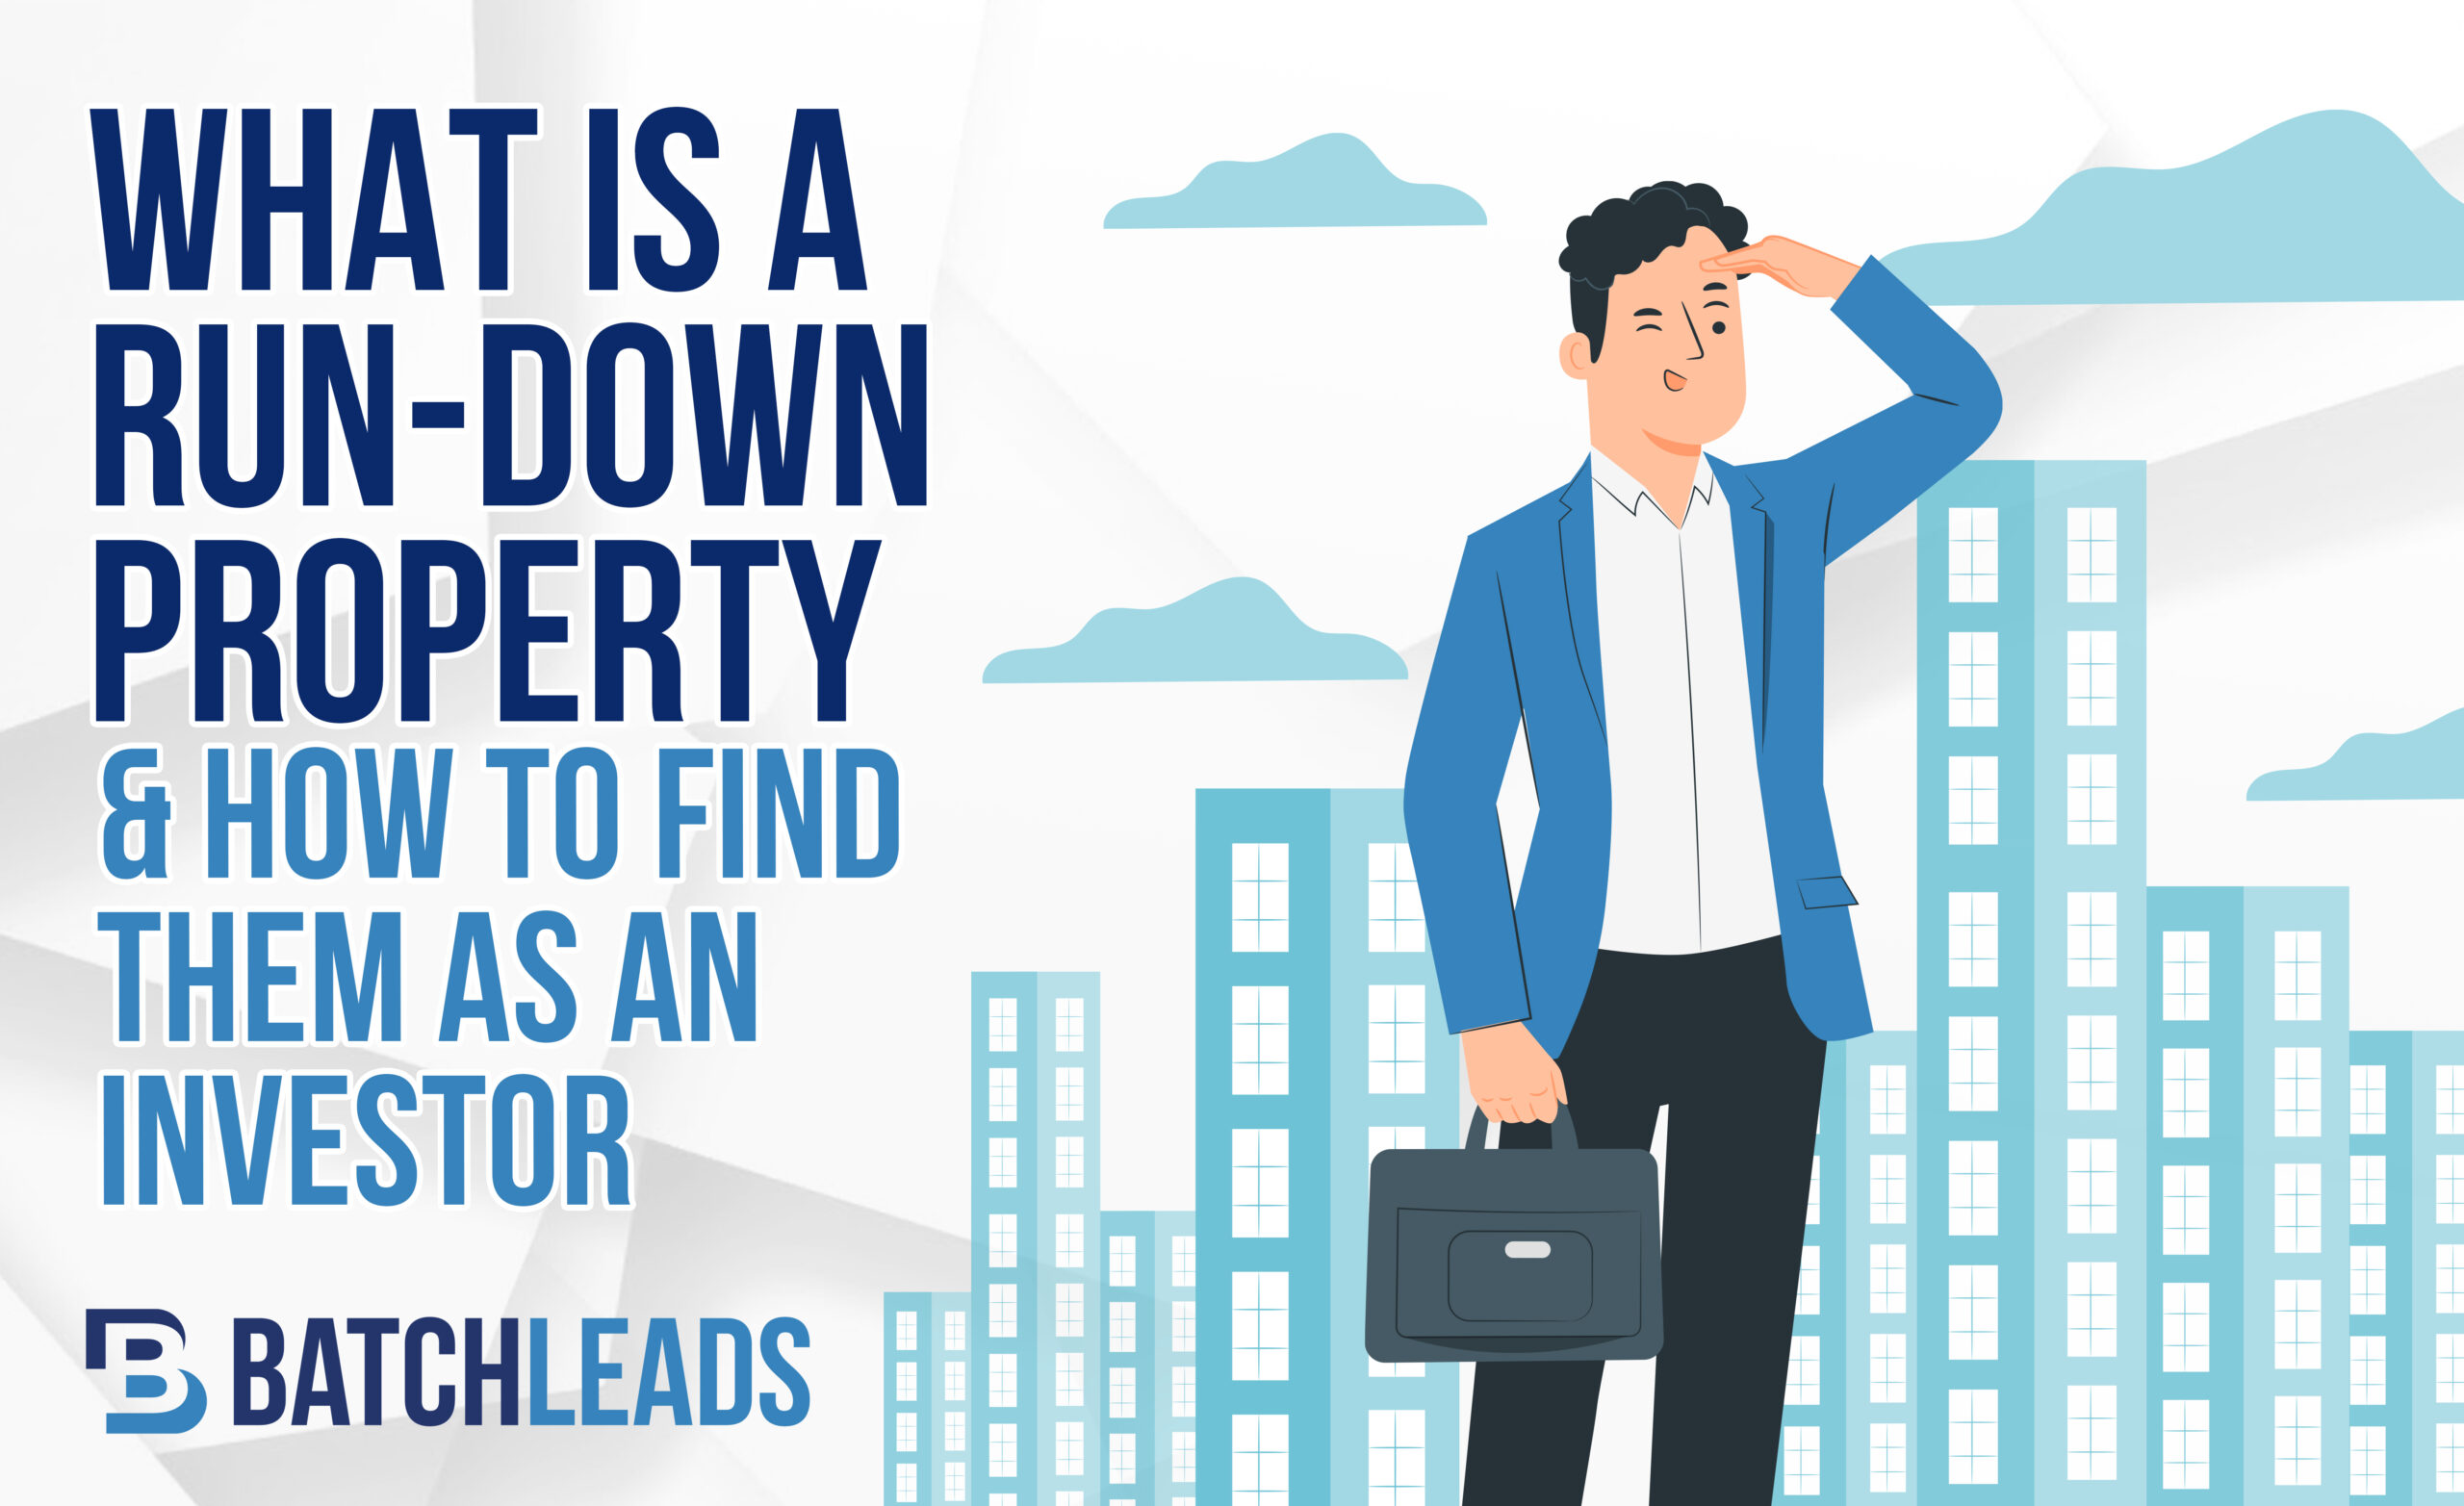 What Is a Run-Down Property & How To Find Them As An Investor